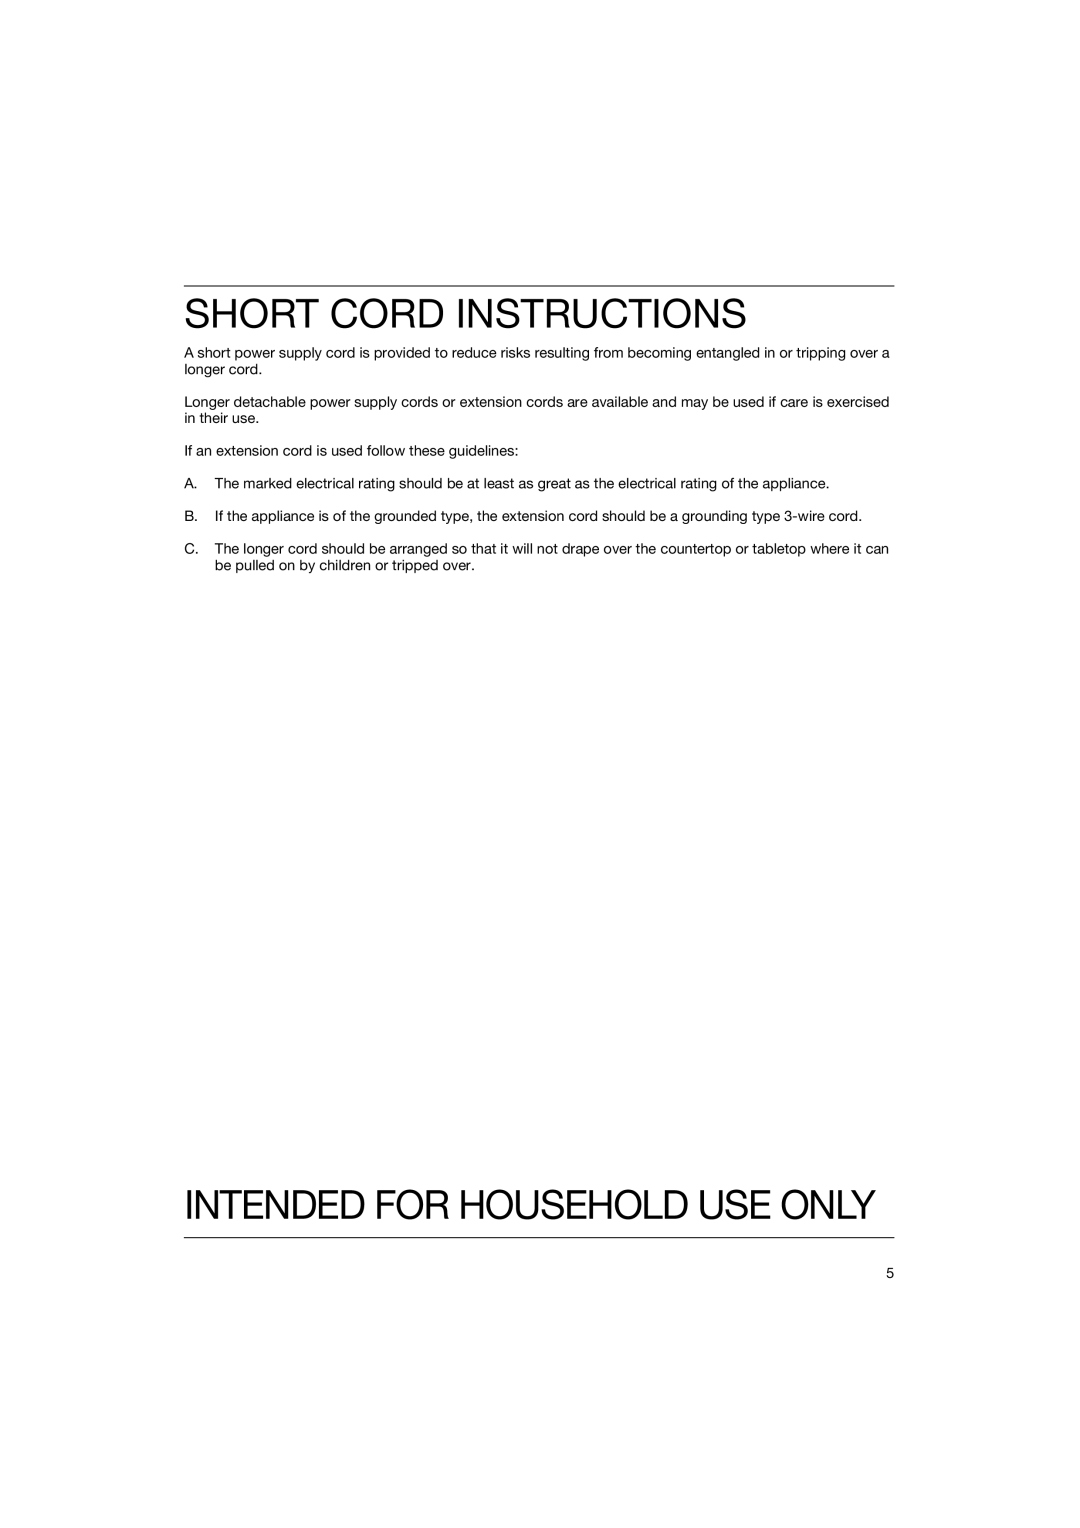 Braun HT 500W, HT 500 B manual Short Cord Instructions, Intended For Household Use Only 